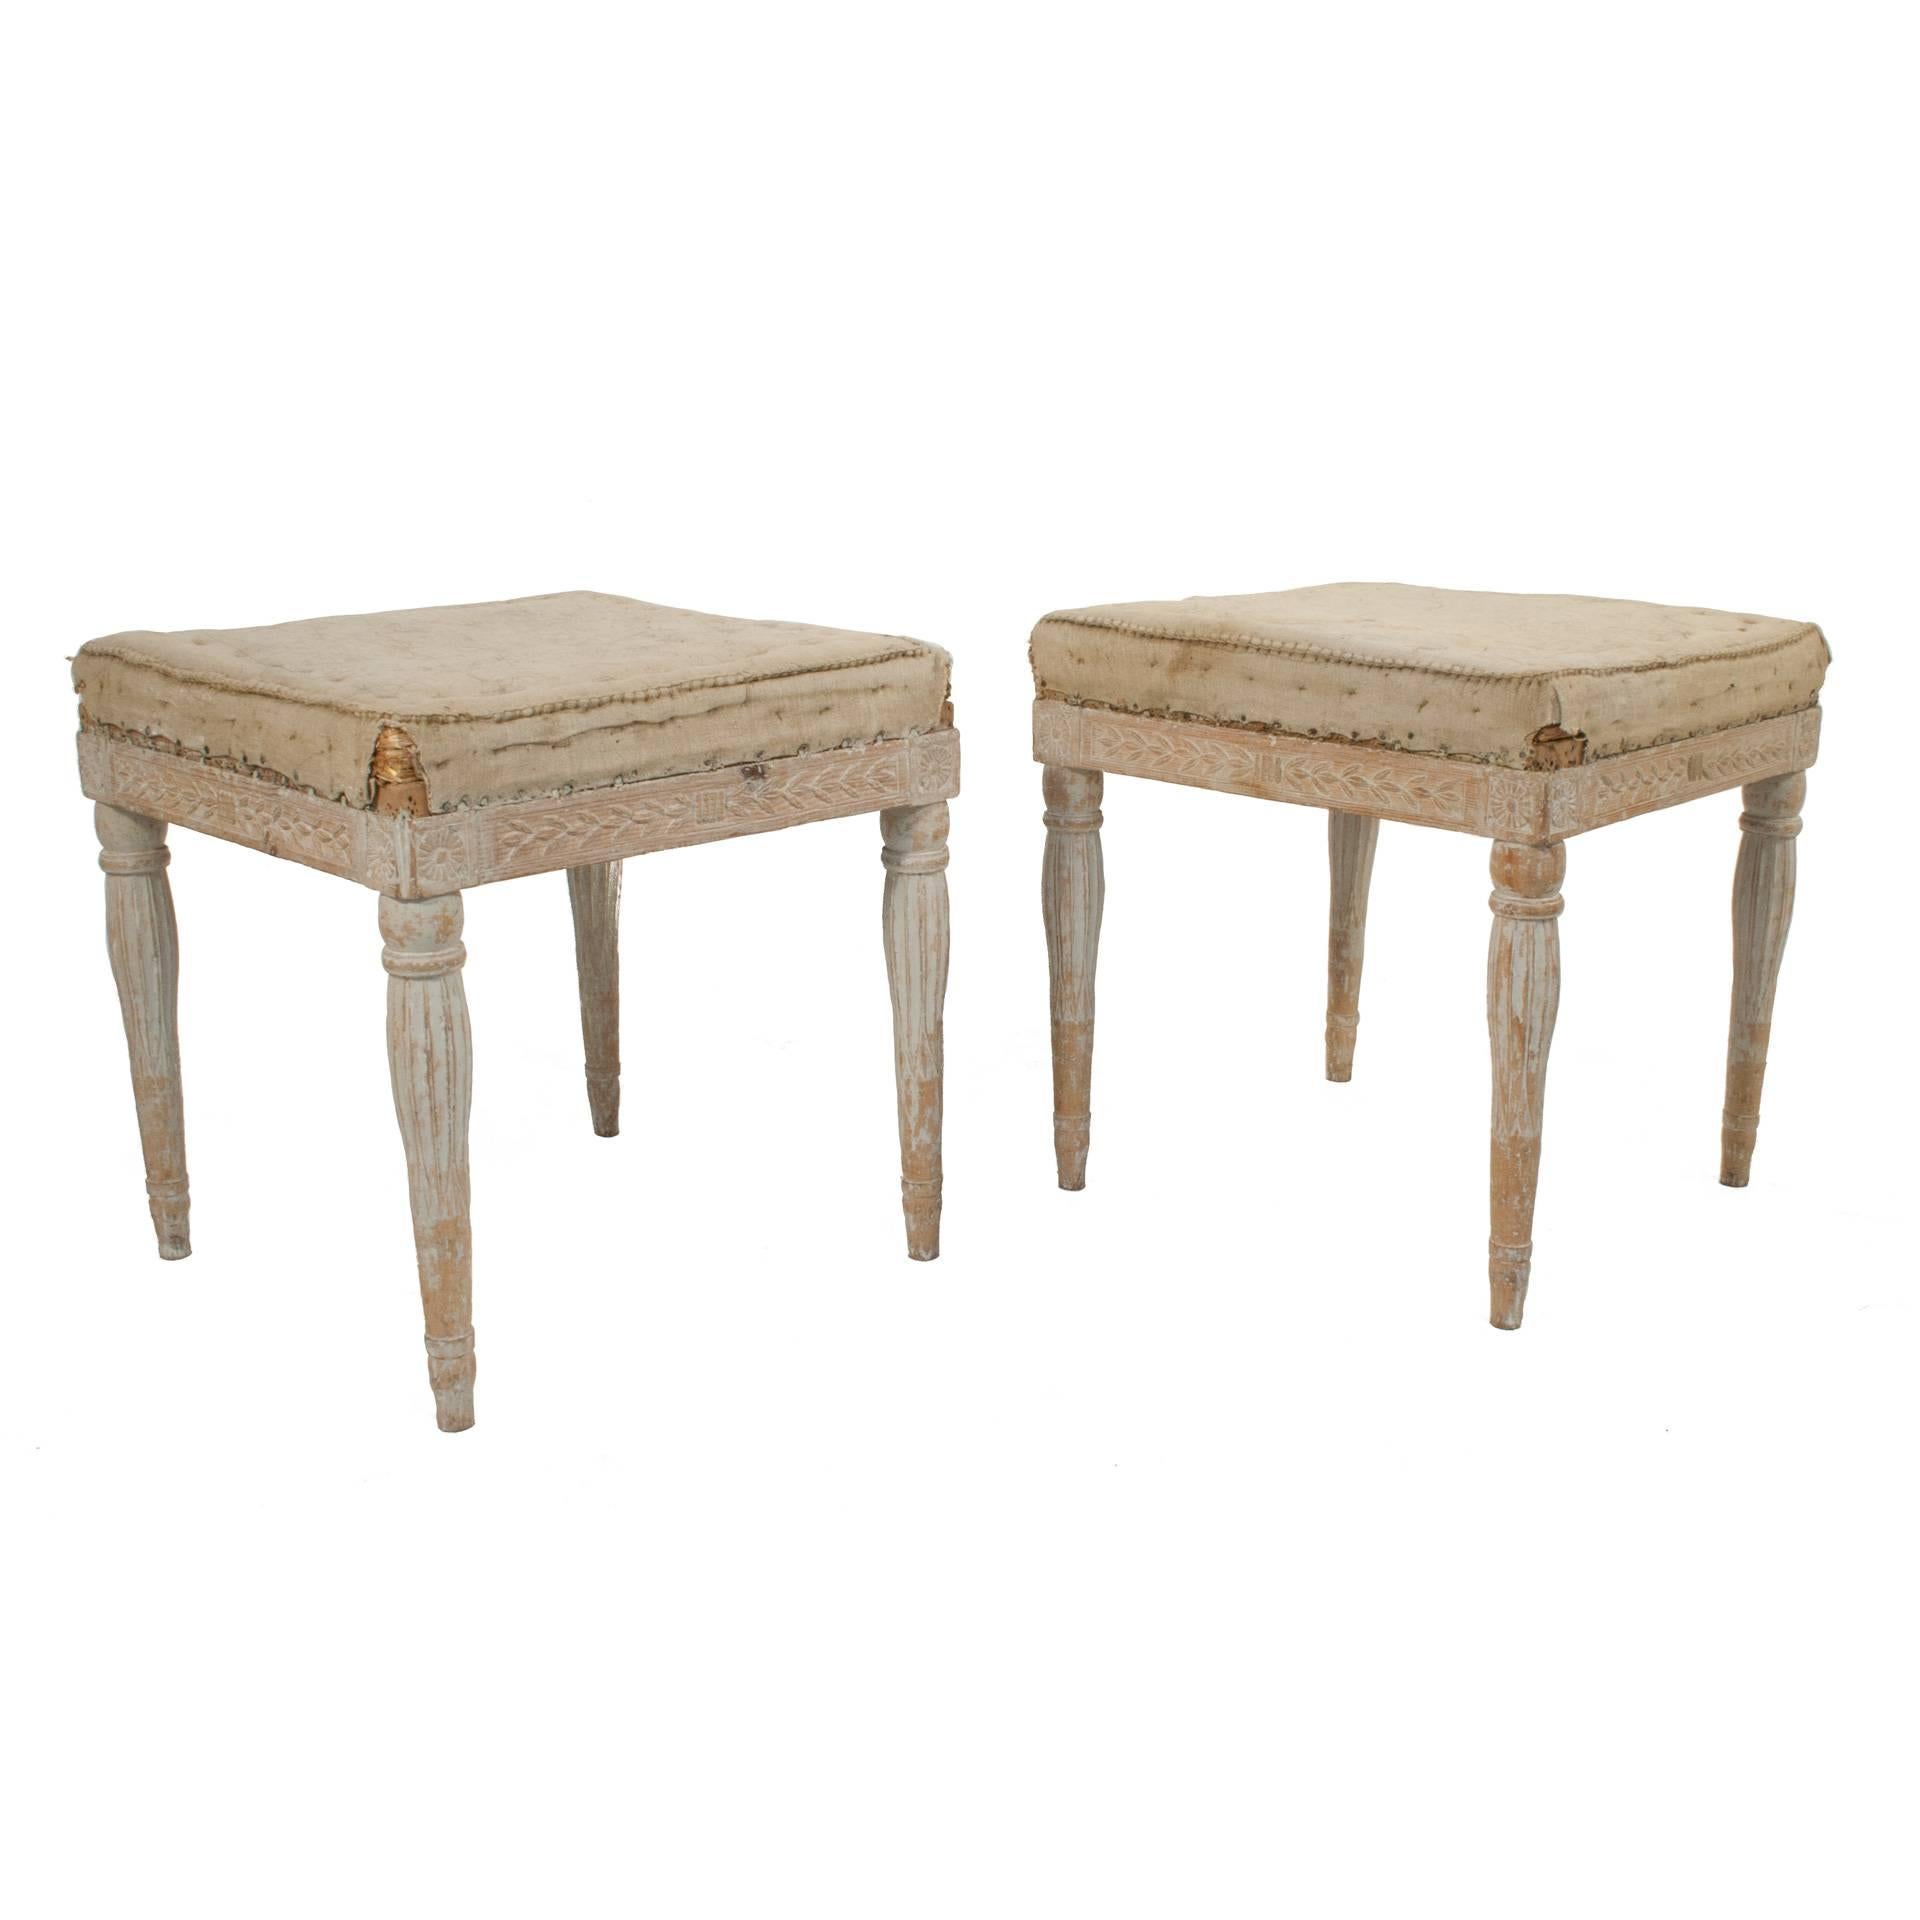 Pair of Gustavian stools in a worn pale grey patina.